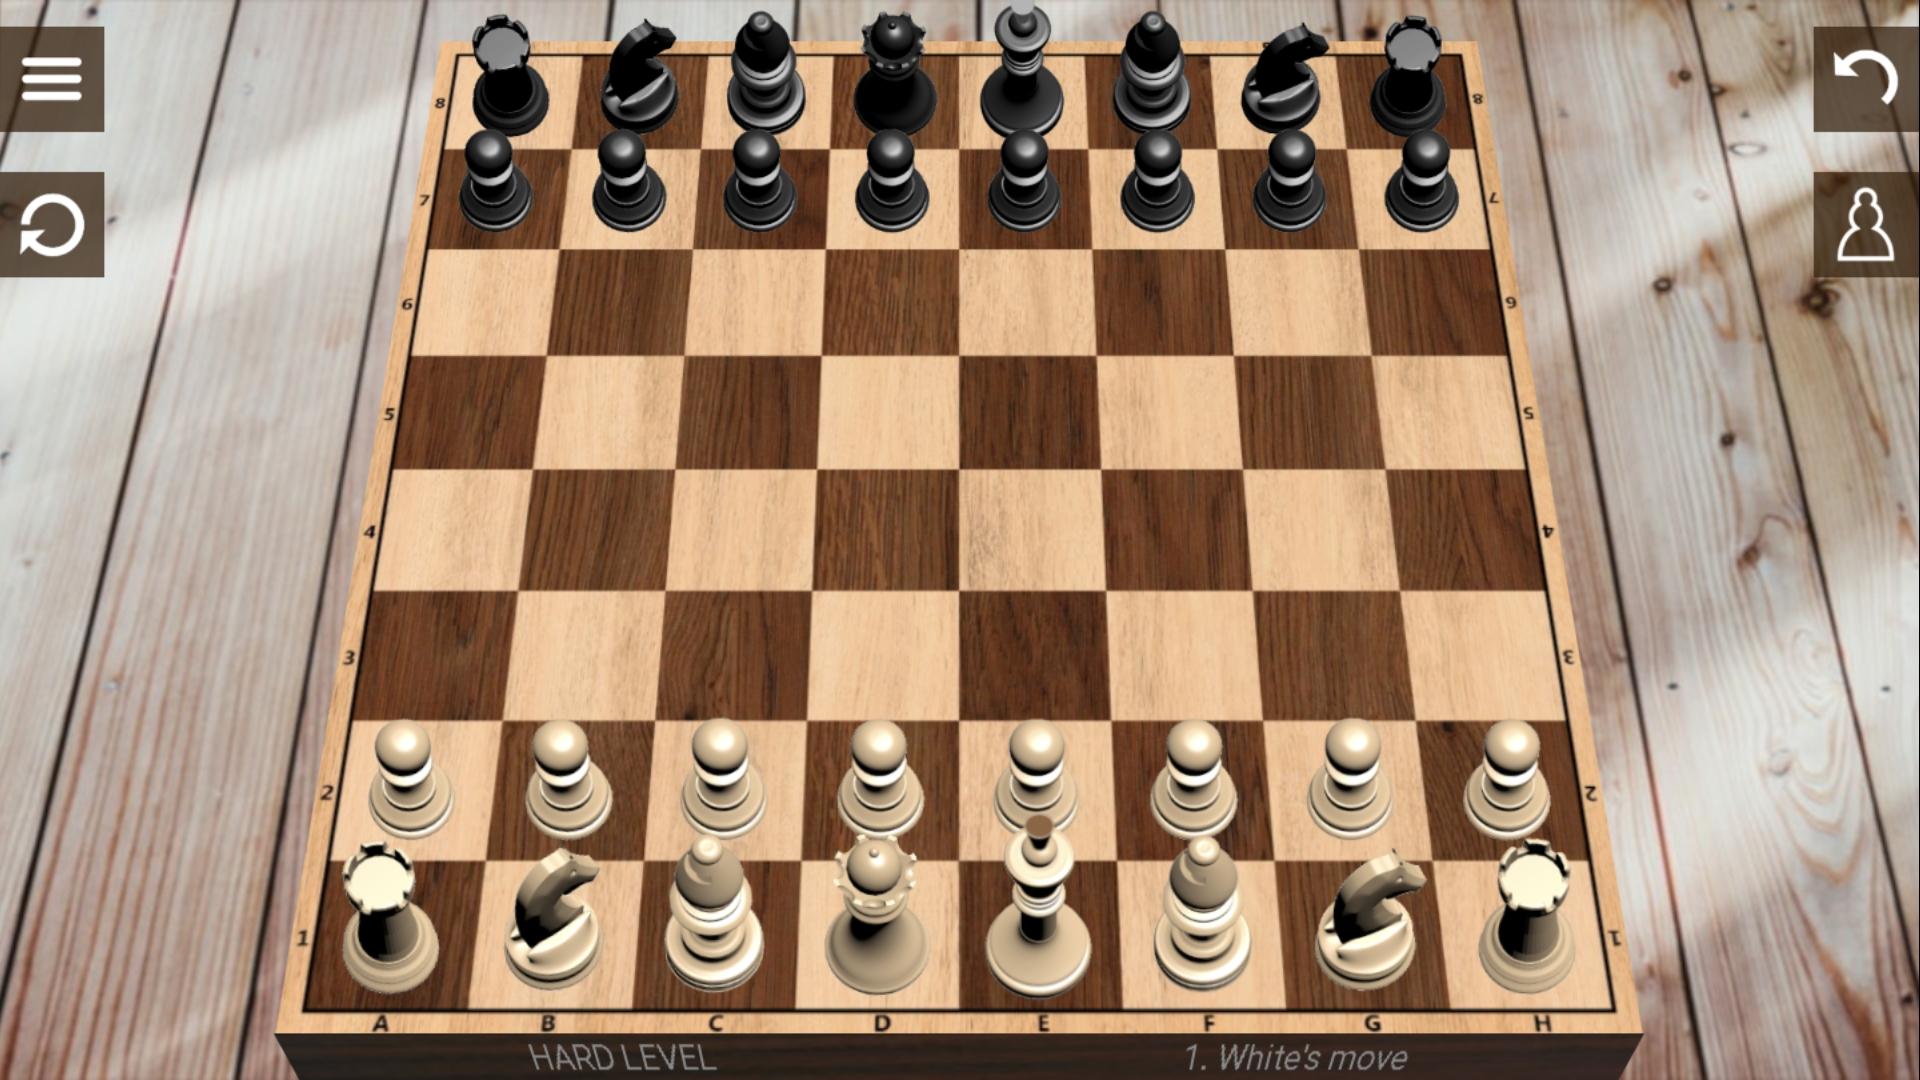 3d chess game free download full version for windows 10